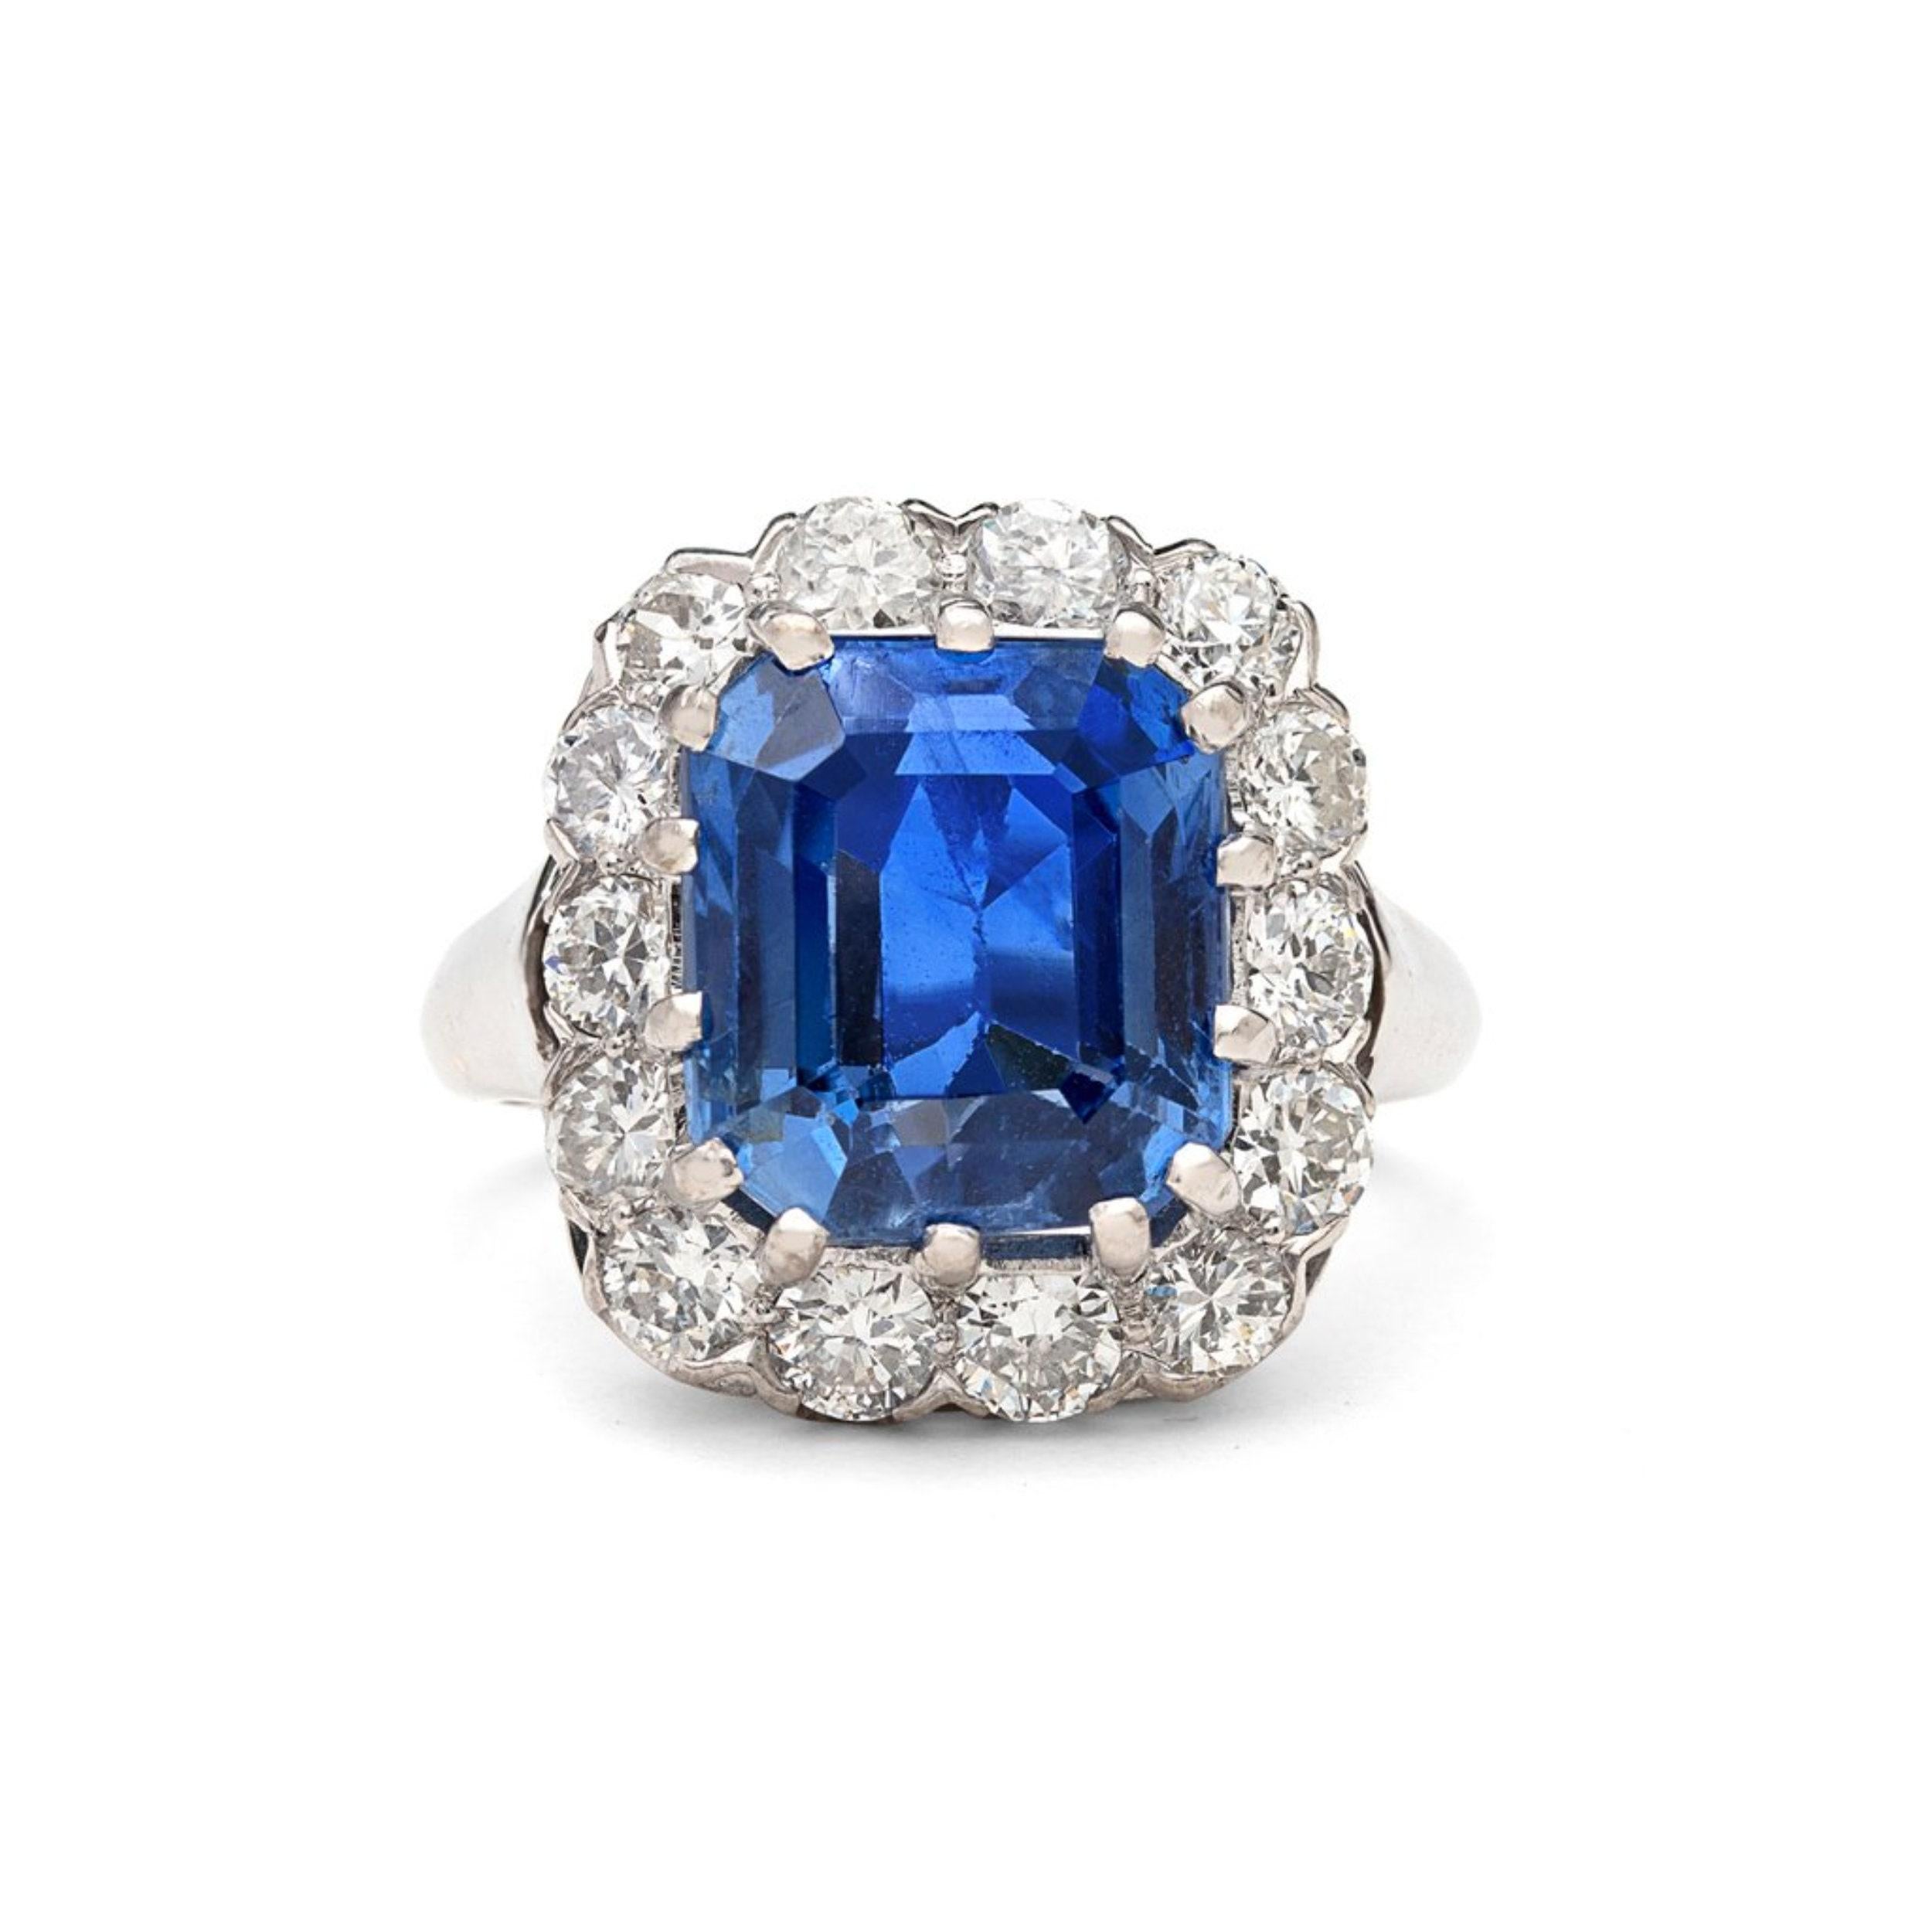 For Sale:  18K Gold 5 CT Natural Sapphire Diamond Antique Art Deco Style Engagement Ring 2